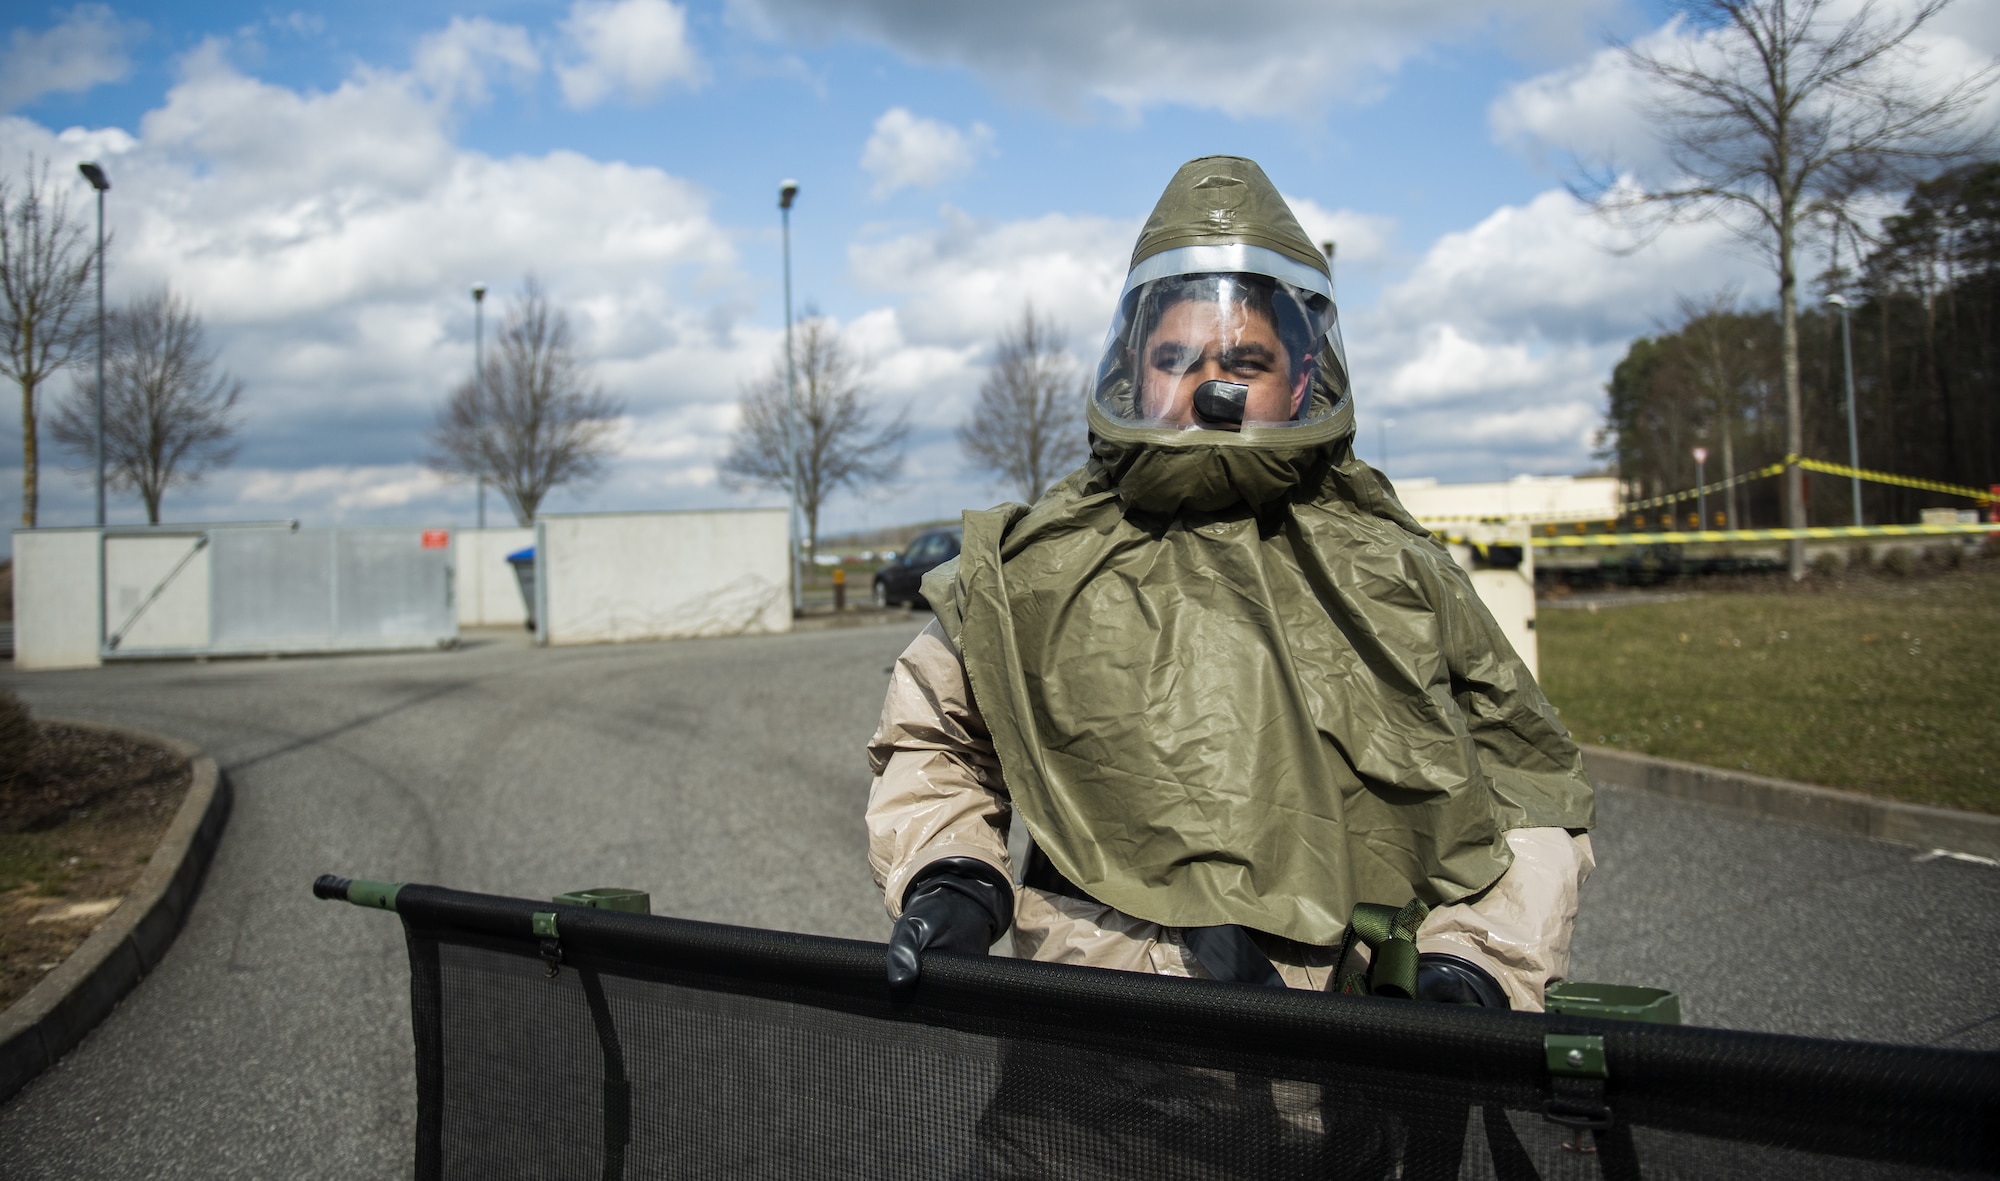 A U.S. Air Force Airman from the 52nd Medical Group carries a gurney to a pop-up decontamination site behind the 52nd MDG at Spangdahlem Air Base, Germany, March 26, 2021. During this portion of the exercise, Airmen subdued and comforted patients in a state of panic from the simulated disaster at the base theater. (U.S. Air Force photo by Senior Airman Ali Stewart)